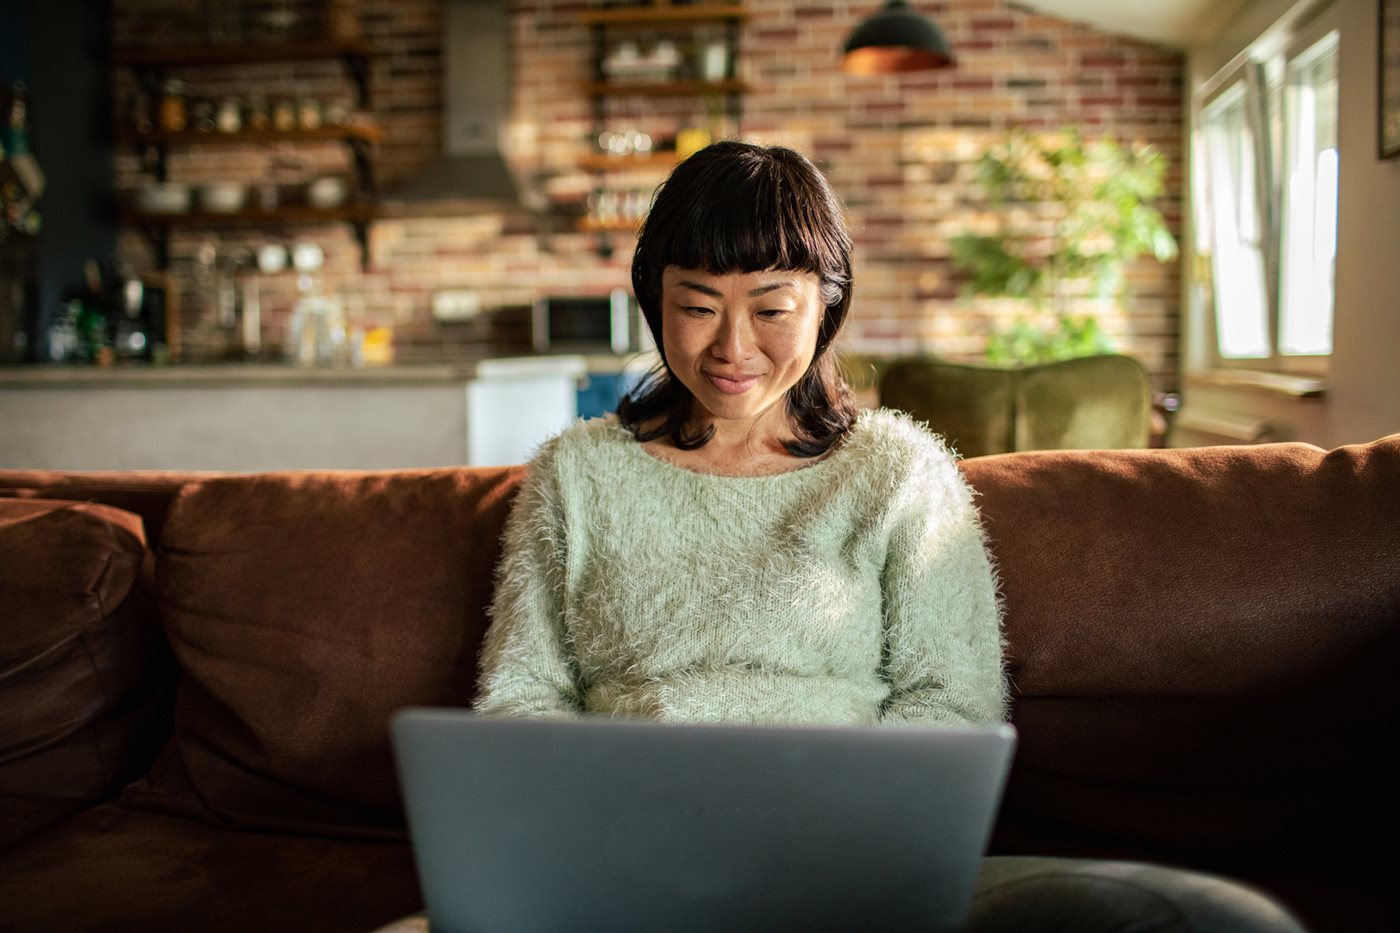 A woman in a sweater sits on her couch while on her laptop exploring GCI Internet, TV and phone plans